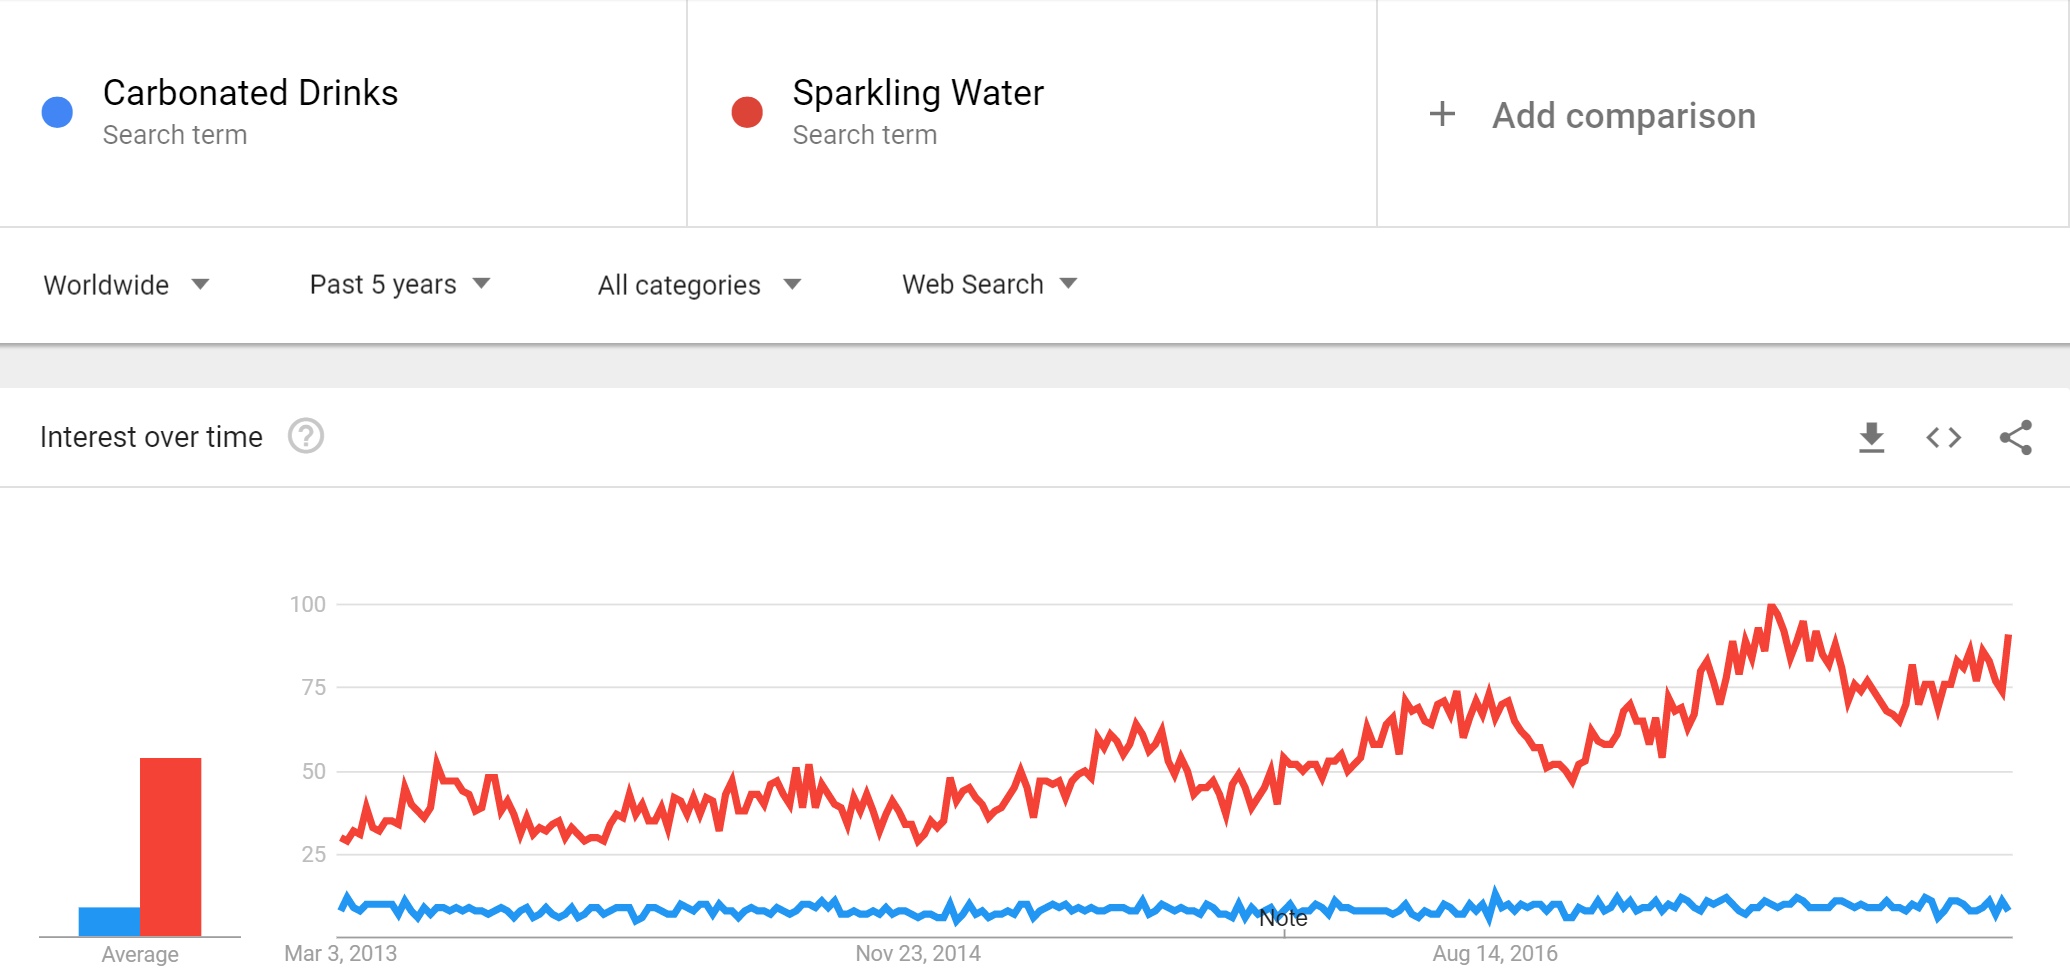 Google trends also indicate that the demand for Sparkling Water and higher than Carbonated Drinks while going up at the same time, in the past 5 years.